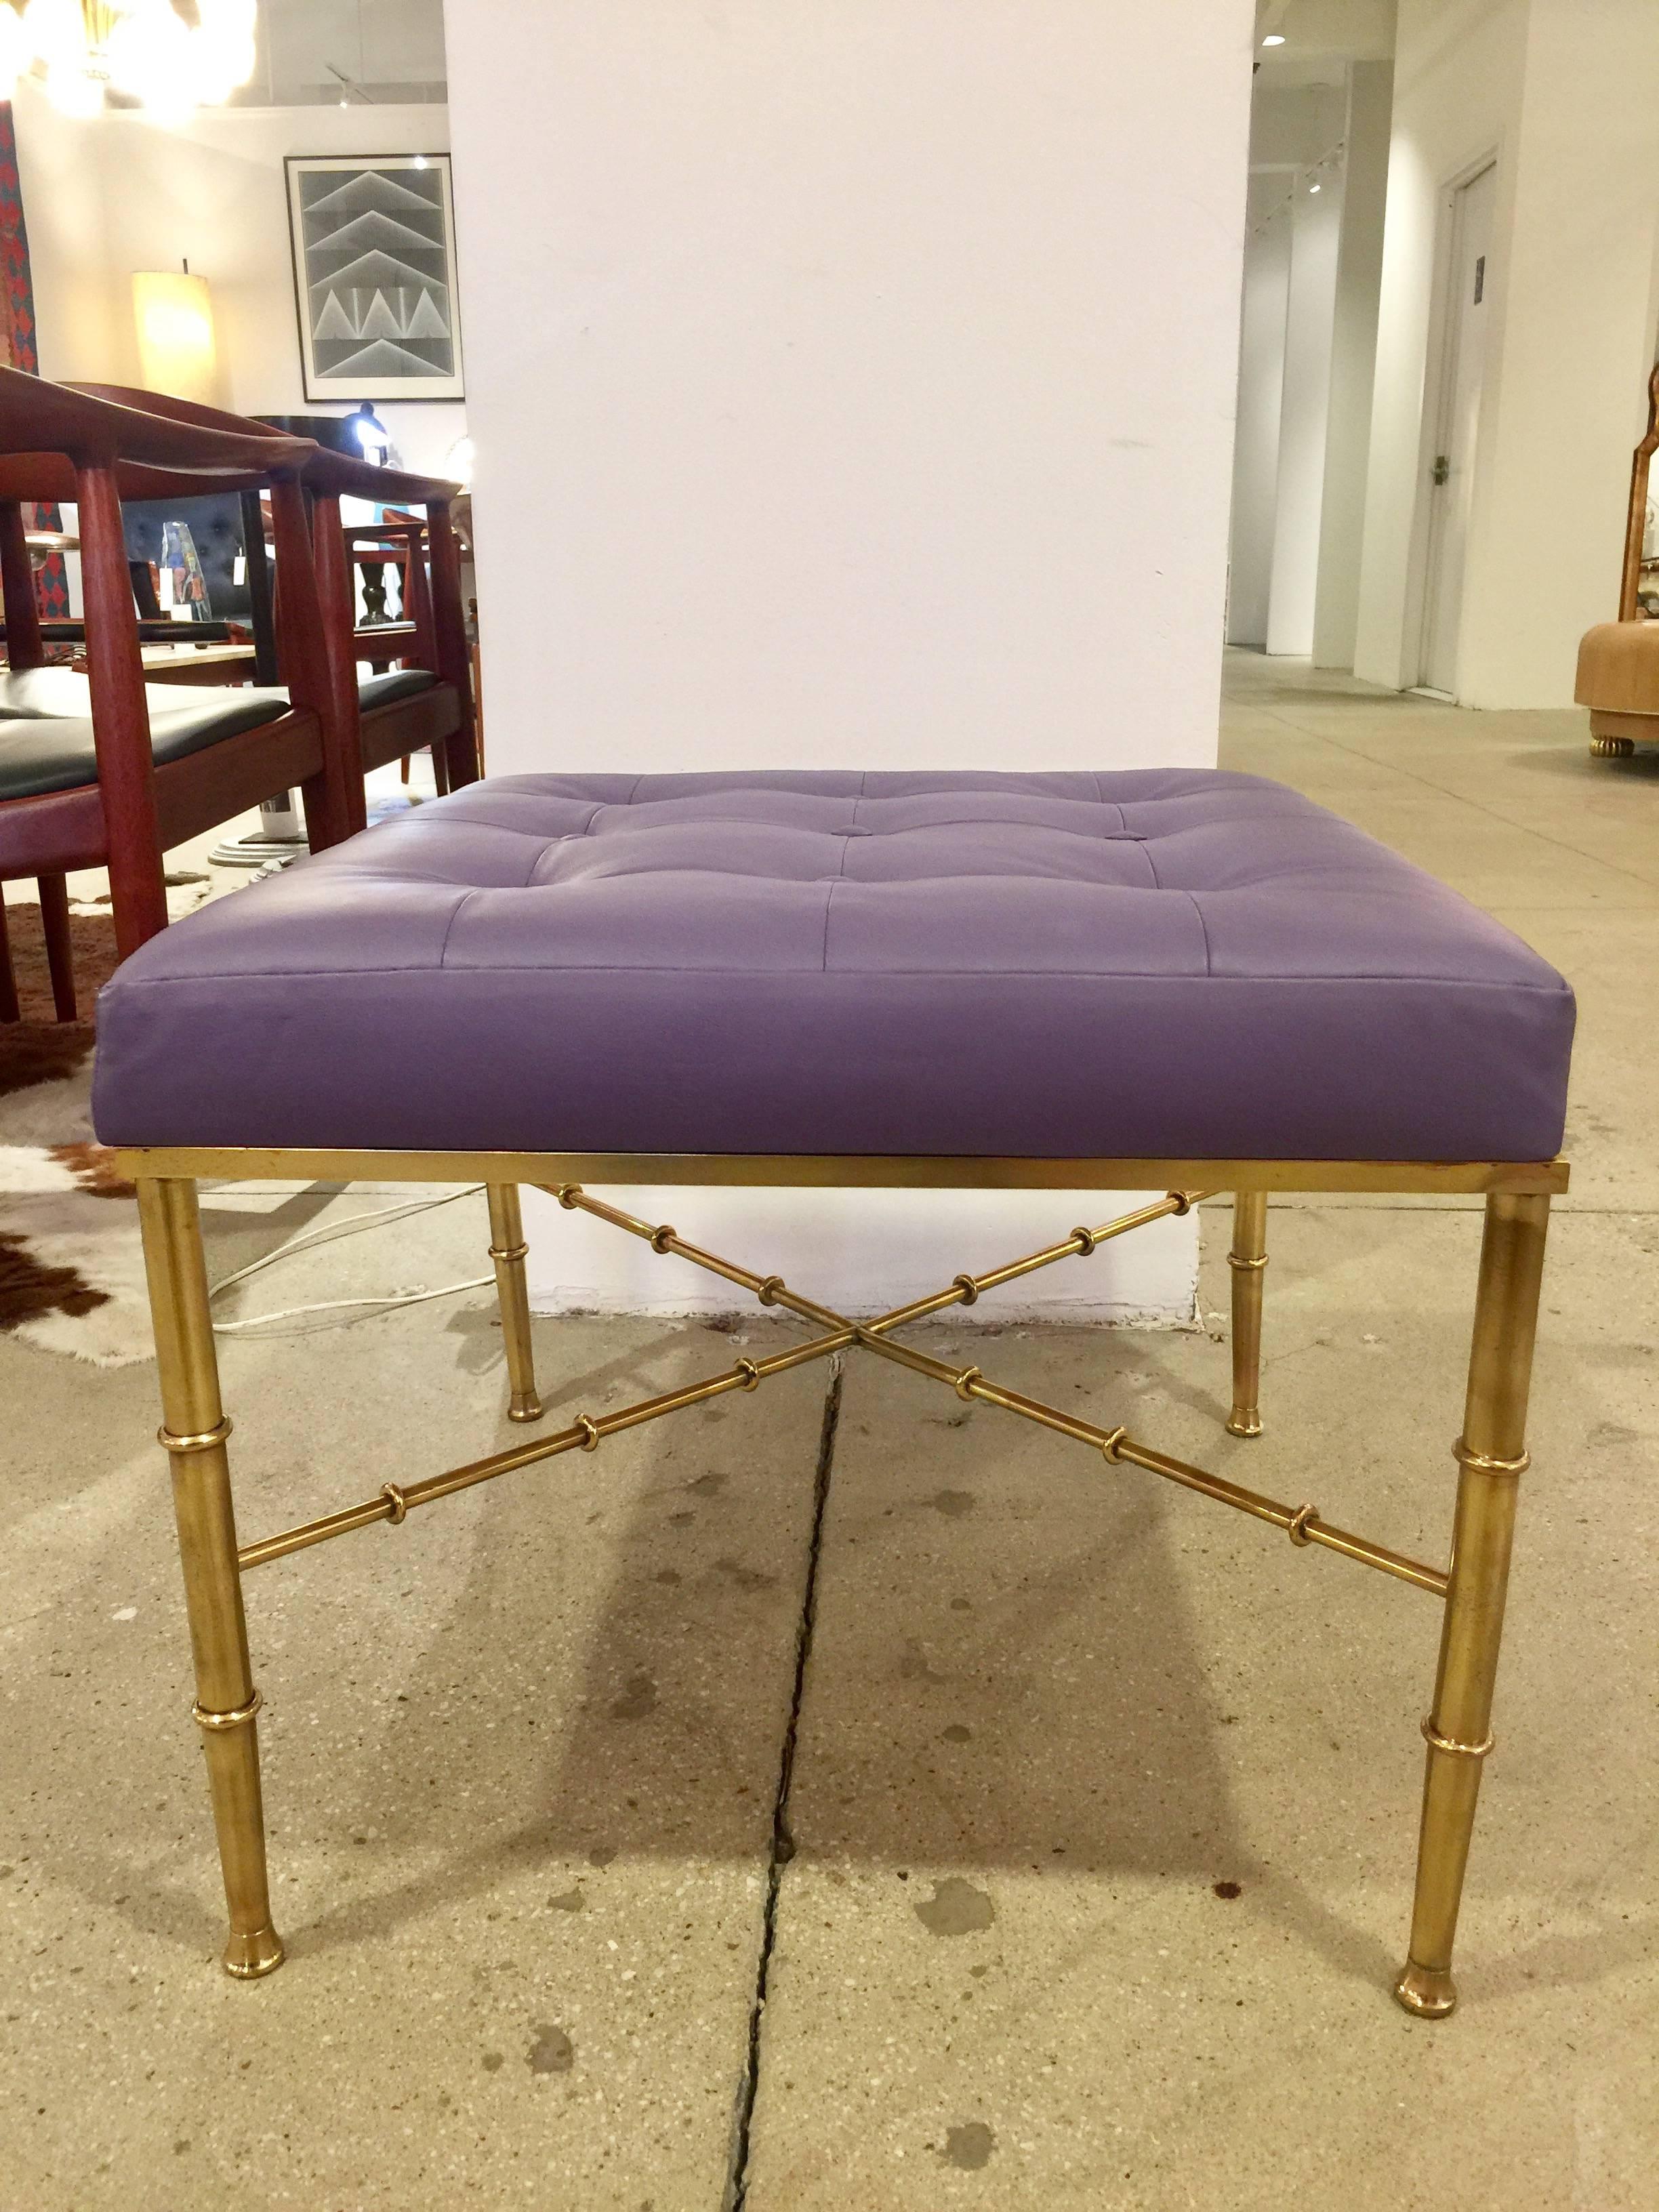 A beautifully designed bench having a faux bamboo brass base.
Modernized and complimented with a tufted leather upholstery
Elegant and modern in design.